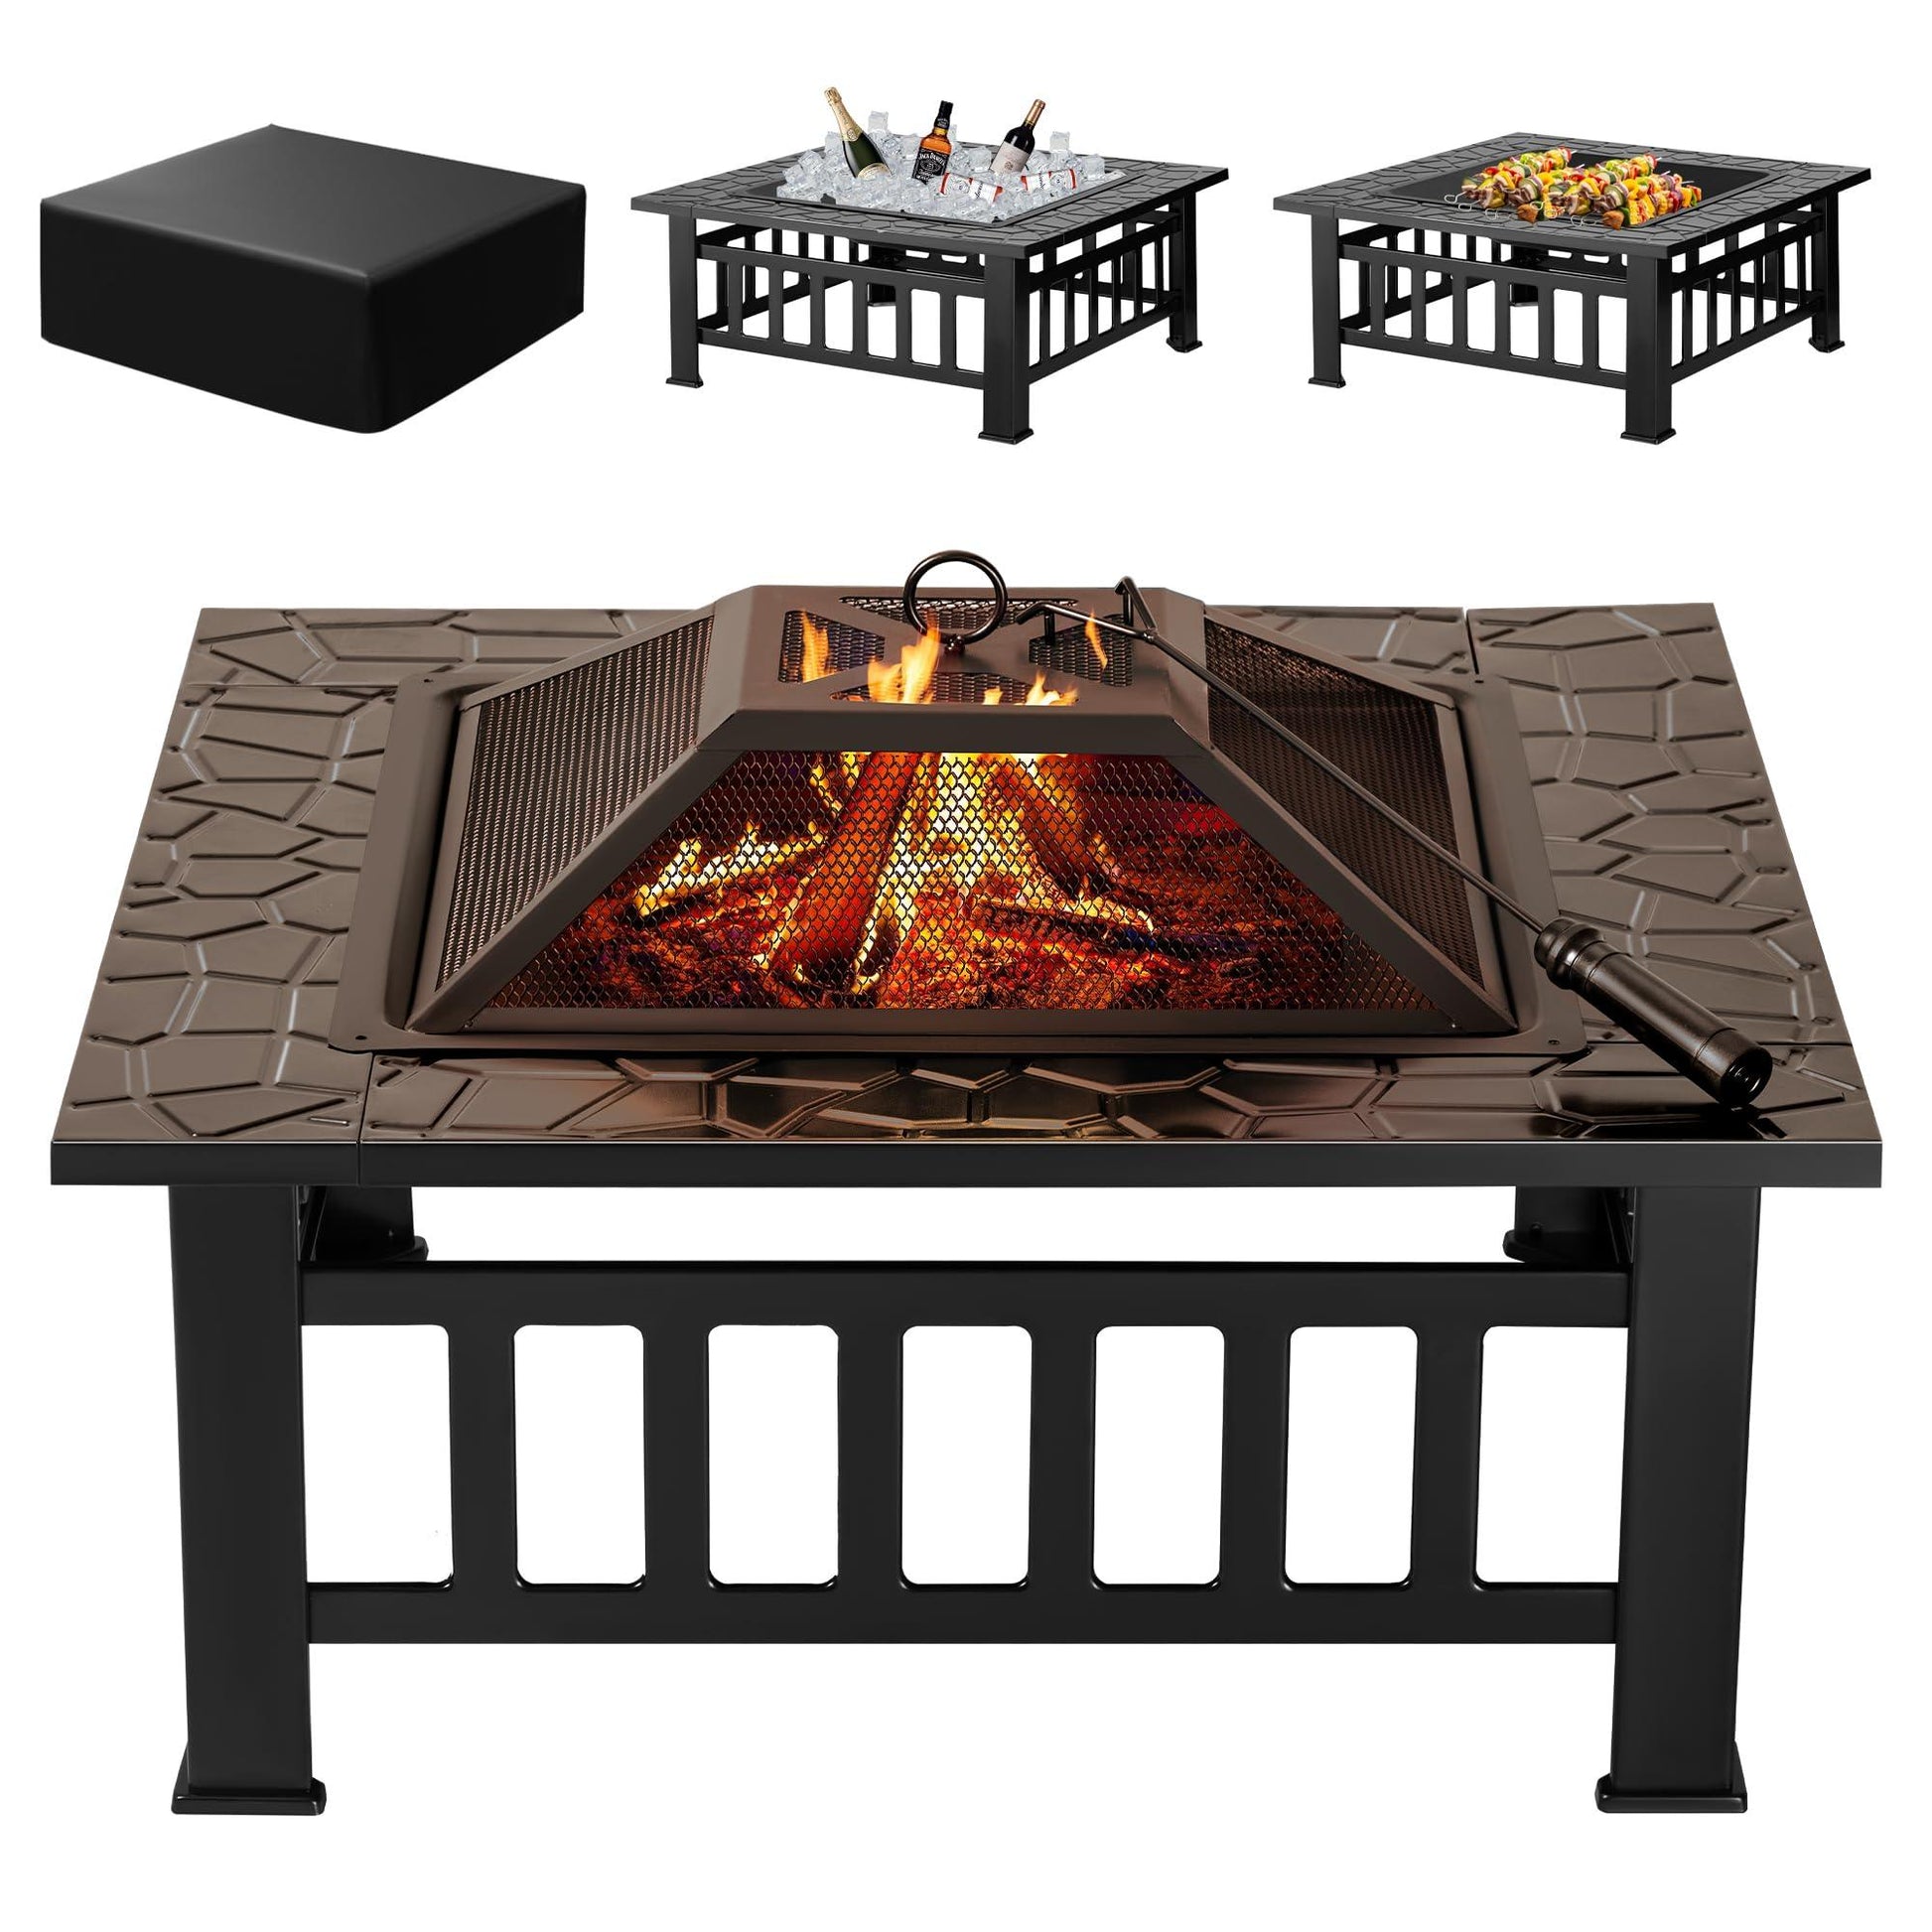 Devoko 32 inch Metal Outdoor Fire Pit Table Multiuse Square Patio BBQ Firepit with Spark Screen Lid and Waterproof Cover for Camping, Outside Wood Burning and Picnic Black - CookCave